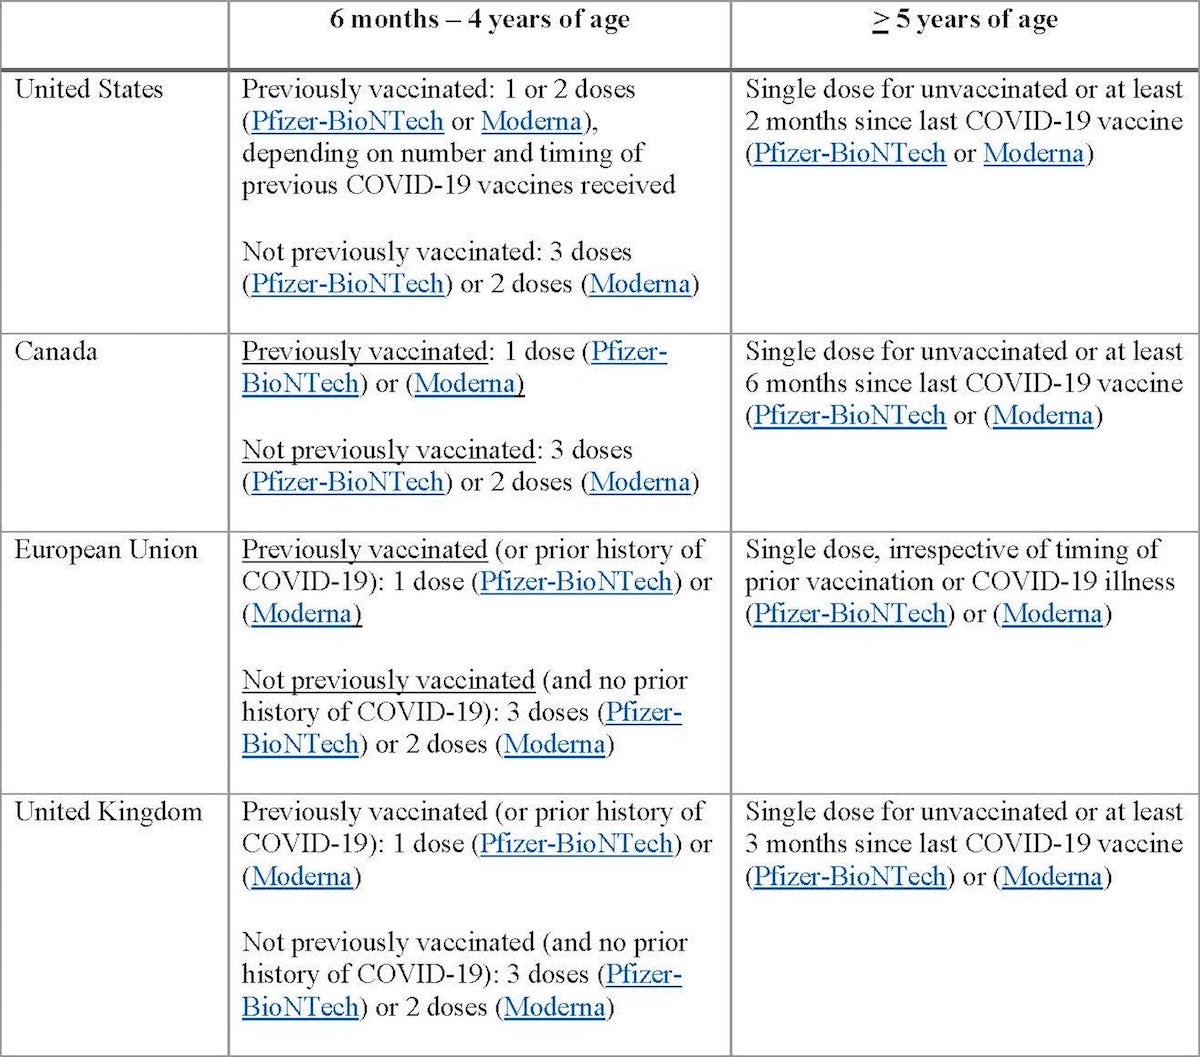 A chart shows the dosing guidelines by age and jurisdiction.